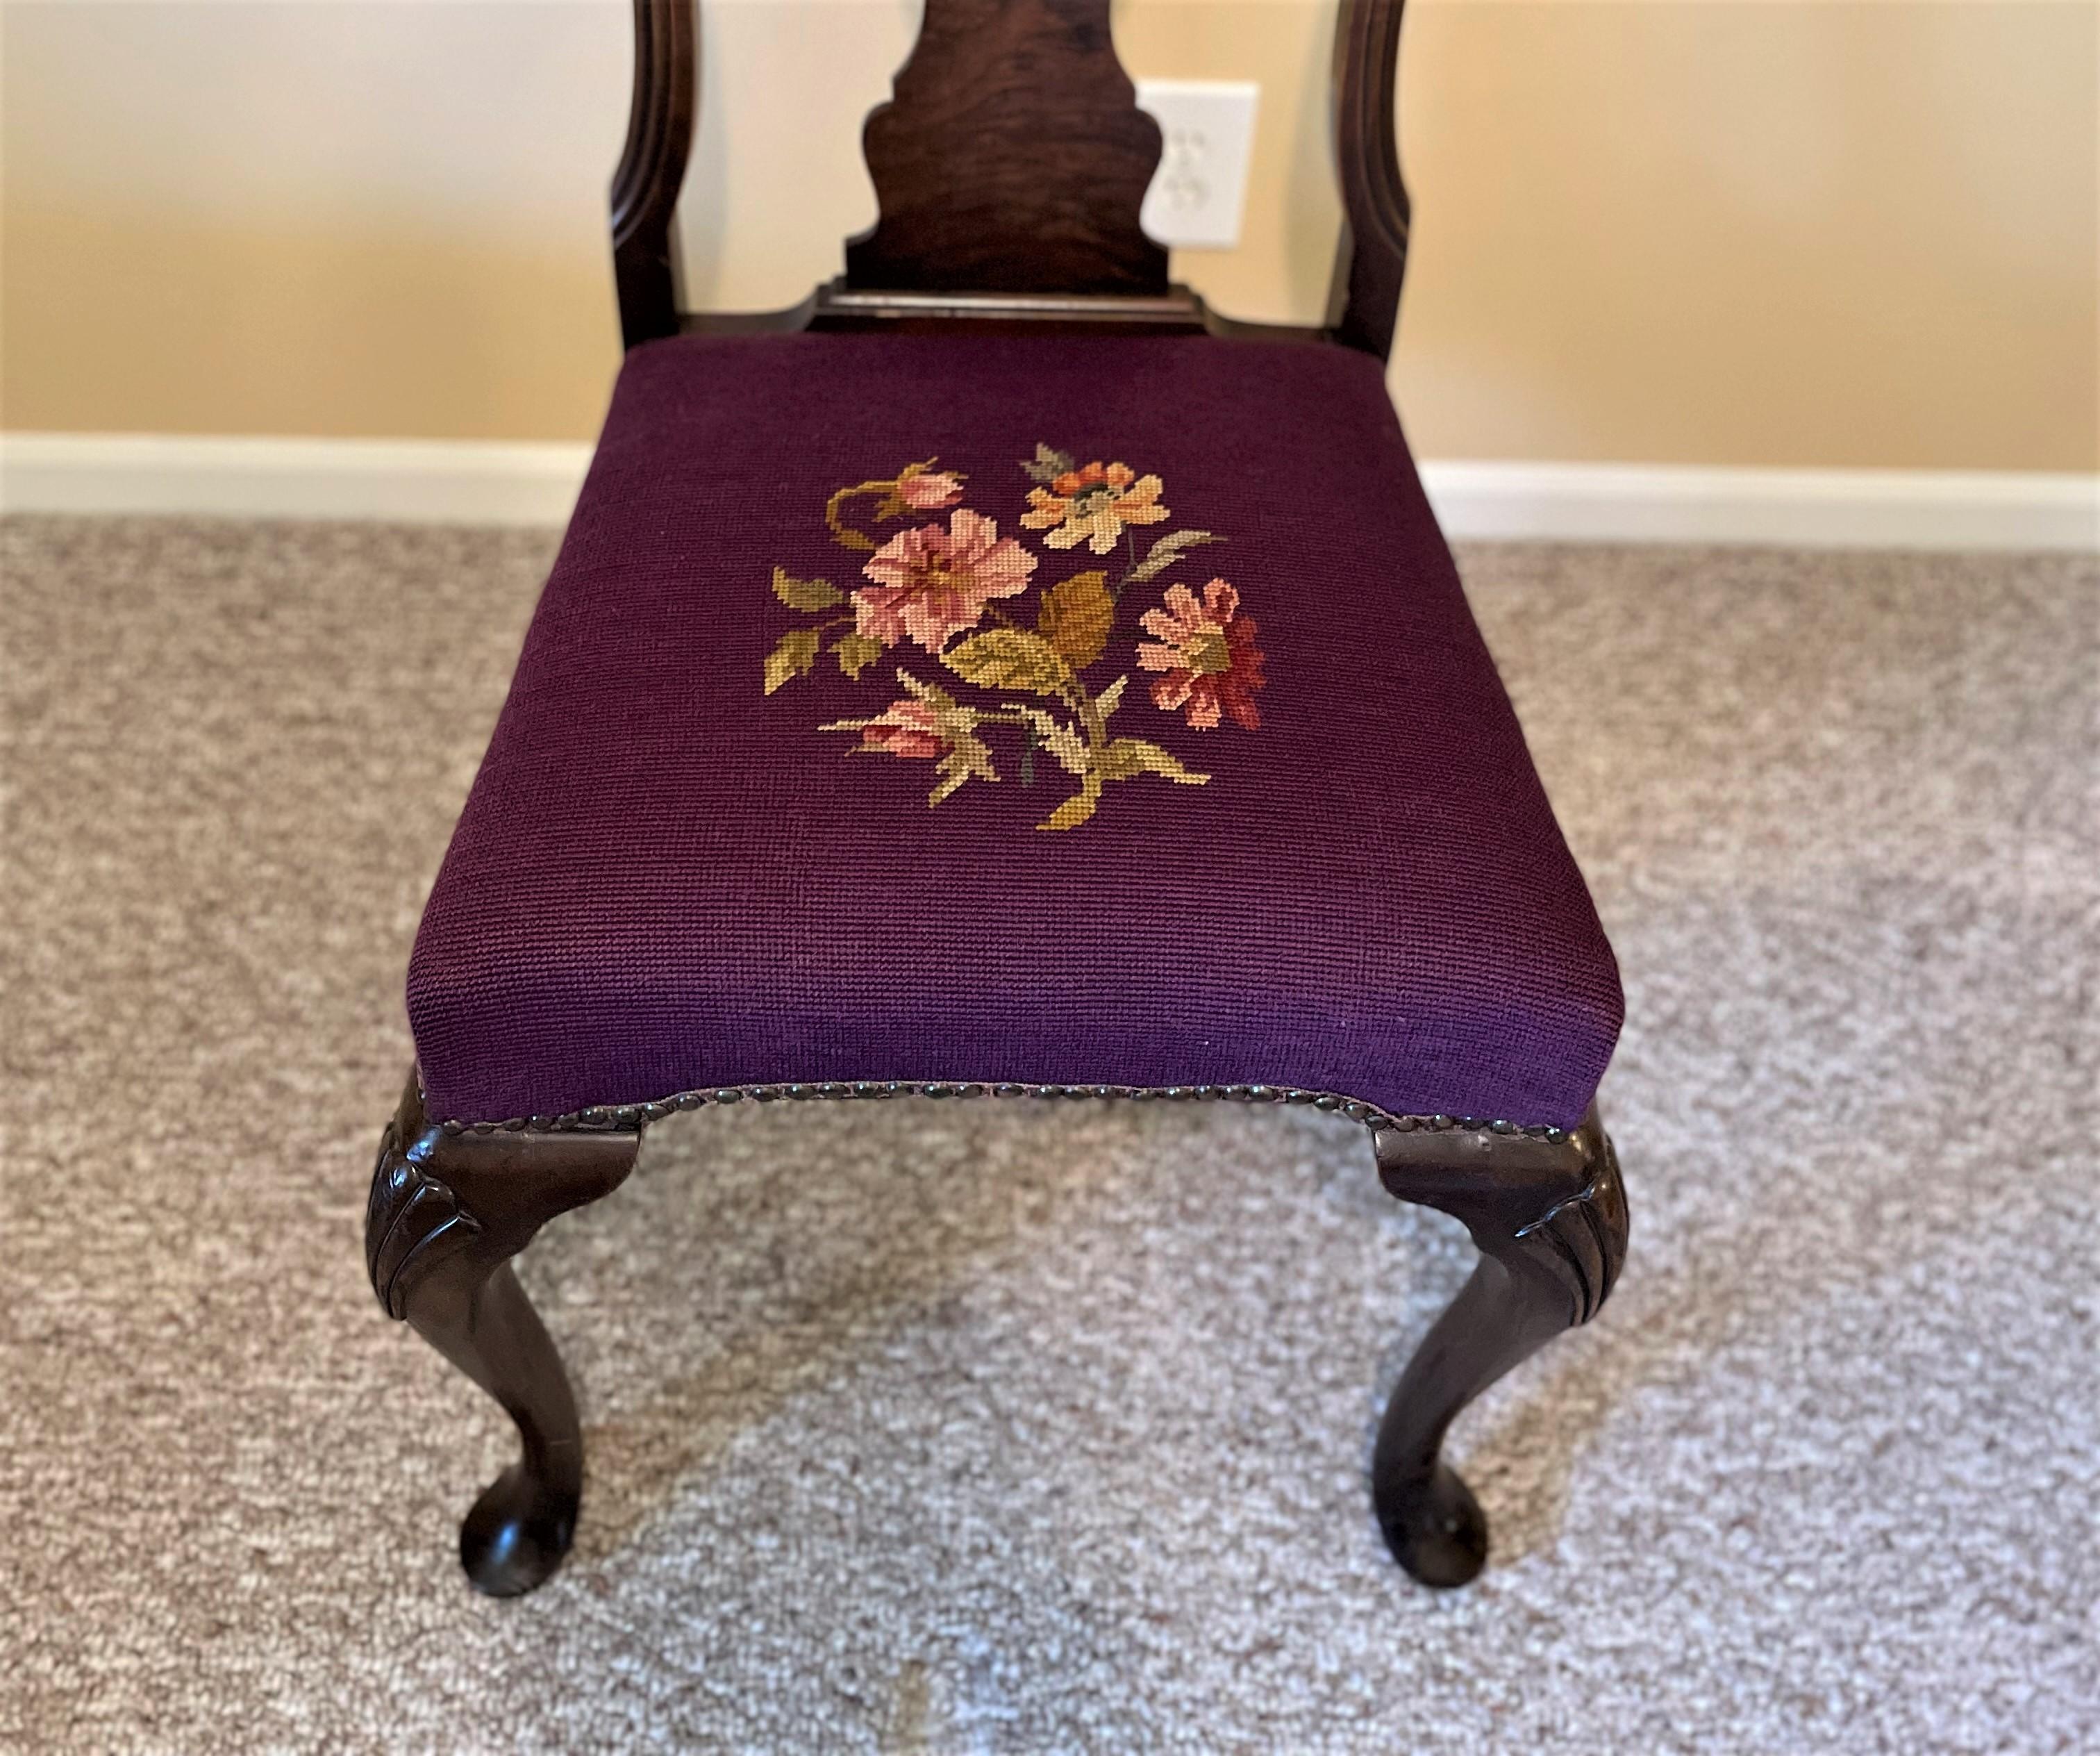 1930s Queen Ann Solid Walnut Dining Chairs with Aubergine Wool Needlepoint Seats For Sale 6